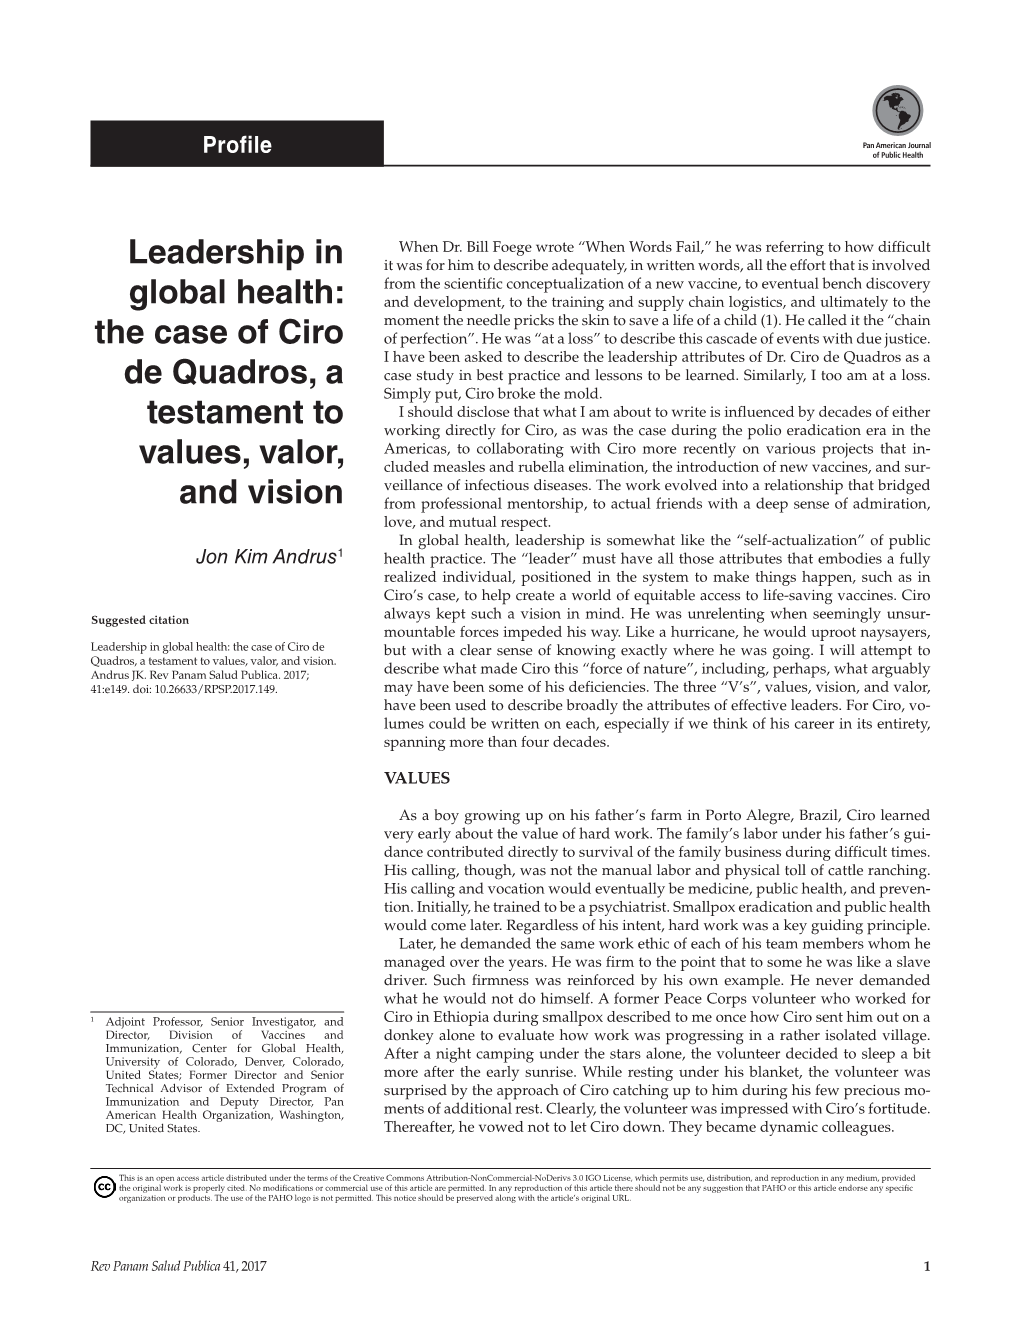 Leadership in Global Health: the Case of Ciro De Quadros, a Testament to Values, Valor, and Vision